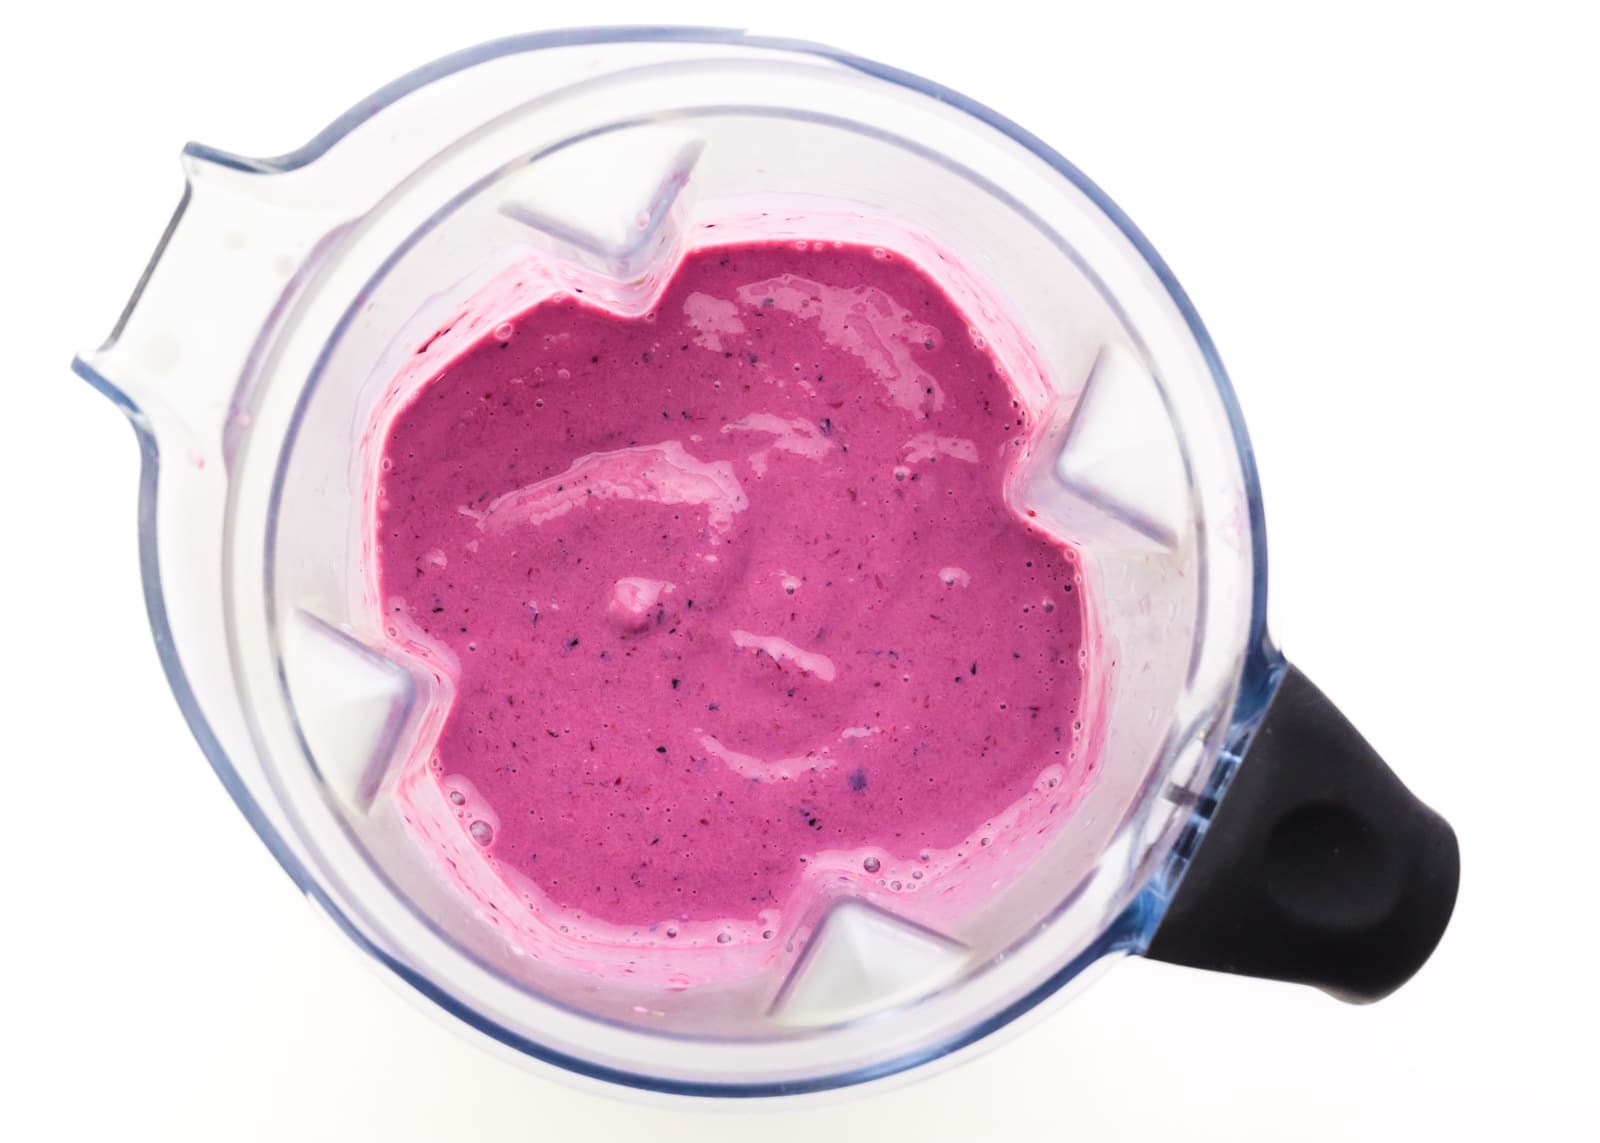 A bright pink berry mixture is in the bottom of a blender jar.